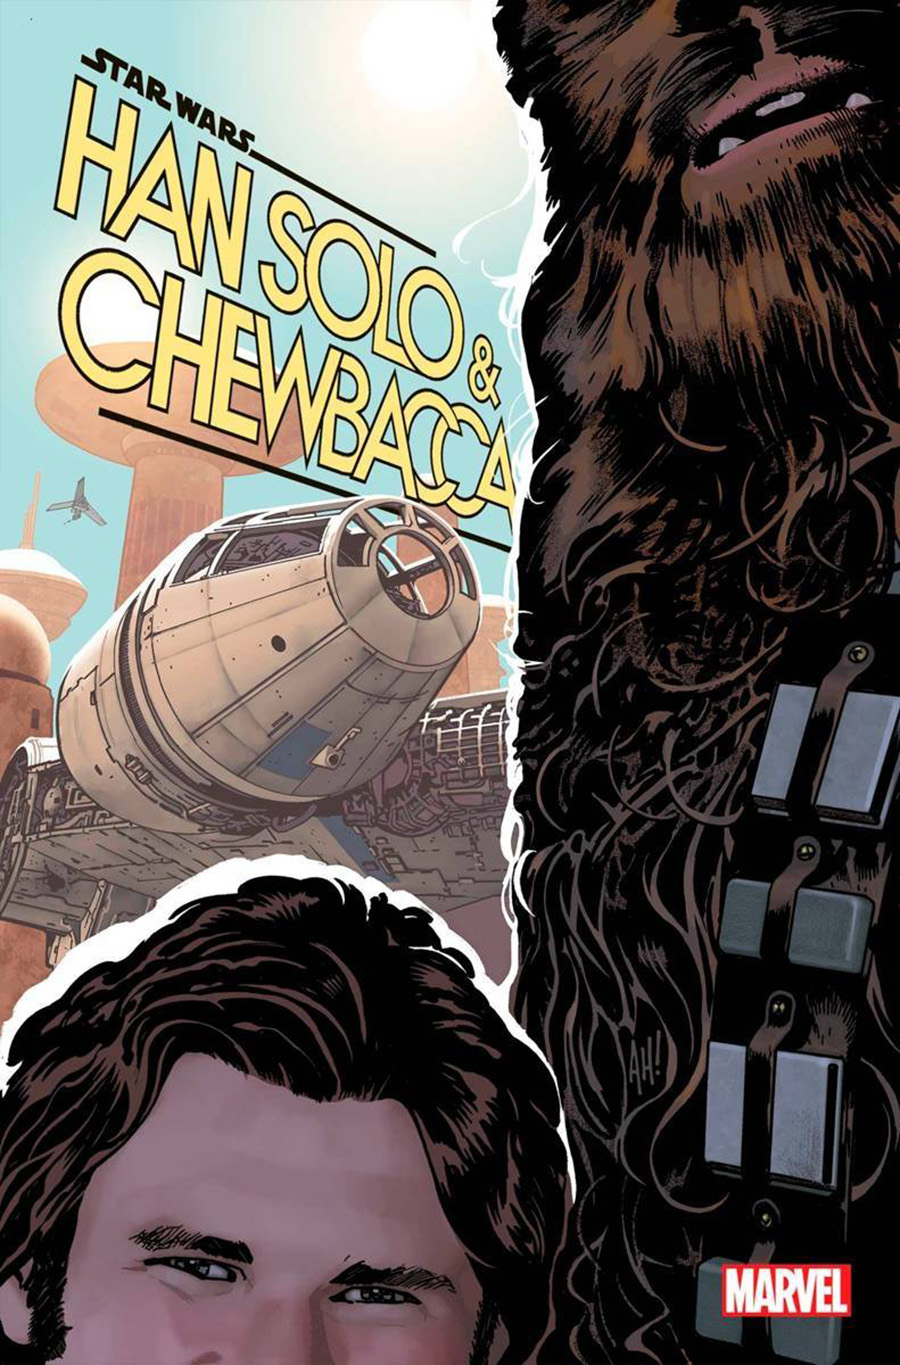 Star Wars Han Solo & Chewbacca #2 Cover C Incentive Adam Hughes Variant Cover